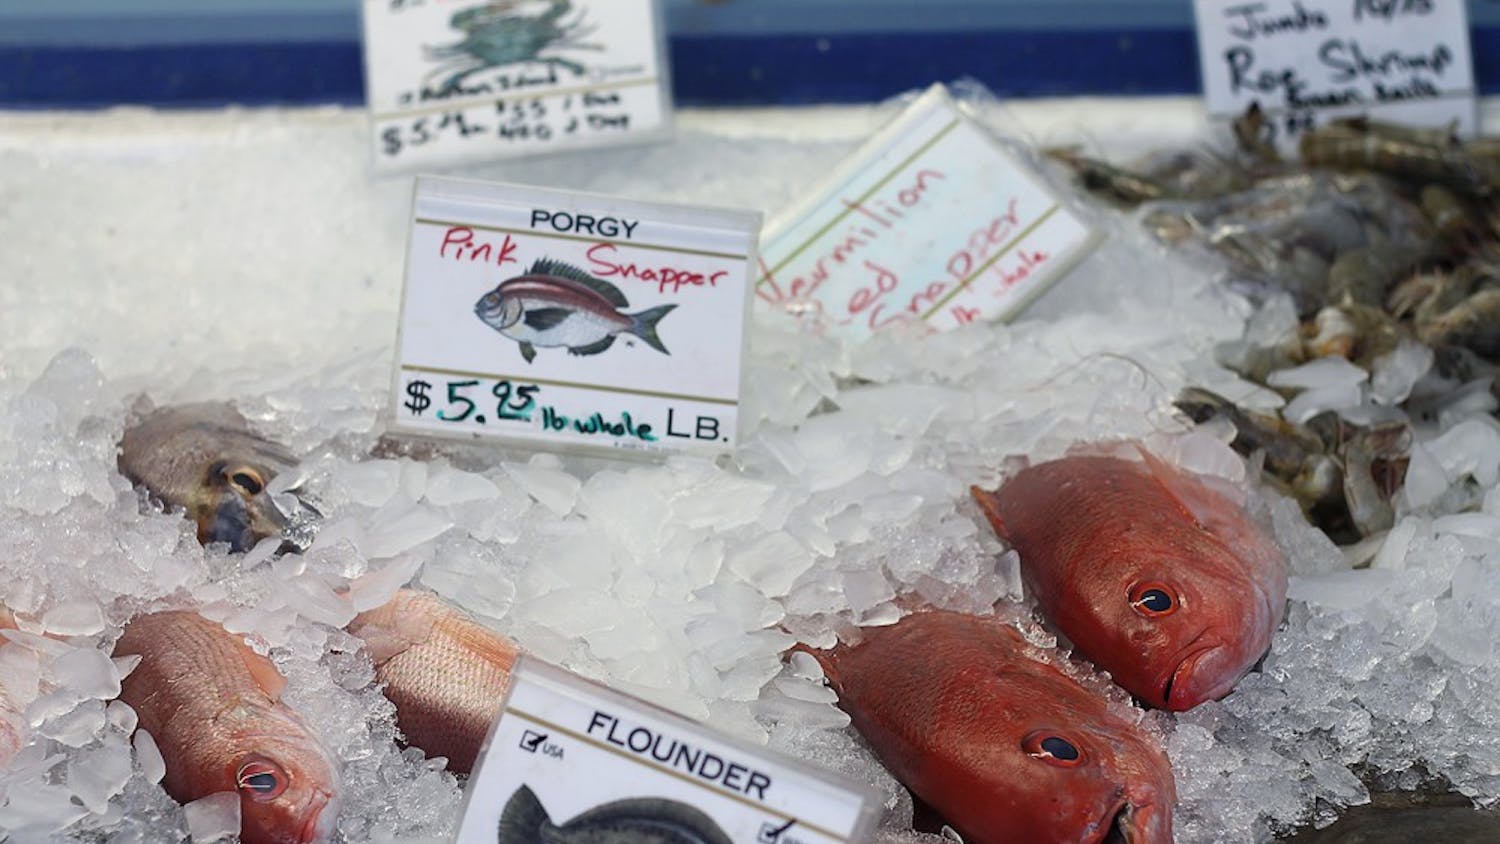 Blue Ocean Market provides seasonal seafood, including fish like pink and vermillion red snapper (above), to restaurants and consumers near its location in Morehead City and to the Triangle area.